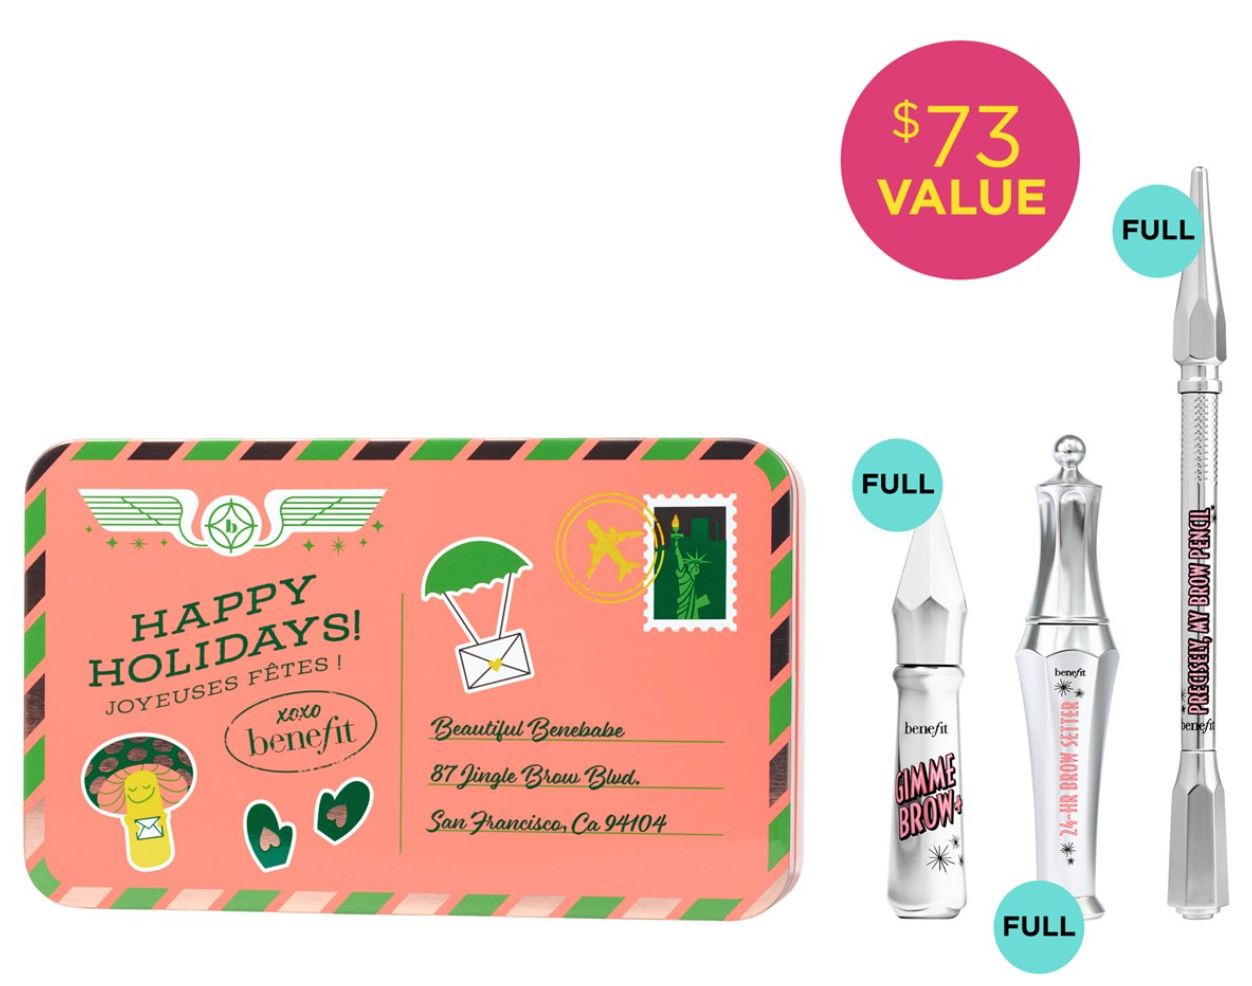 Benefit has recently released seventeen new value sets, just in time for the holiday season. Including various eye products and face powders, these sets contain many products in one box that are perfect for every makeup lover. Check out some of Glitter’s favorite value sets from Benefit Cosmetics.